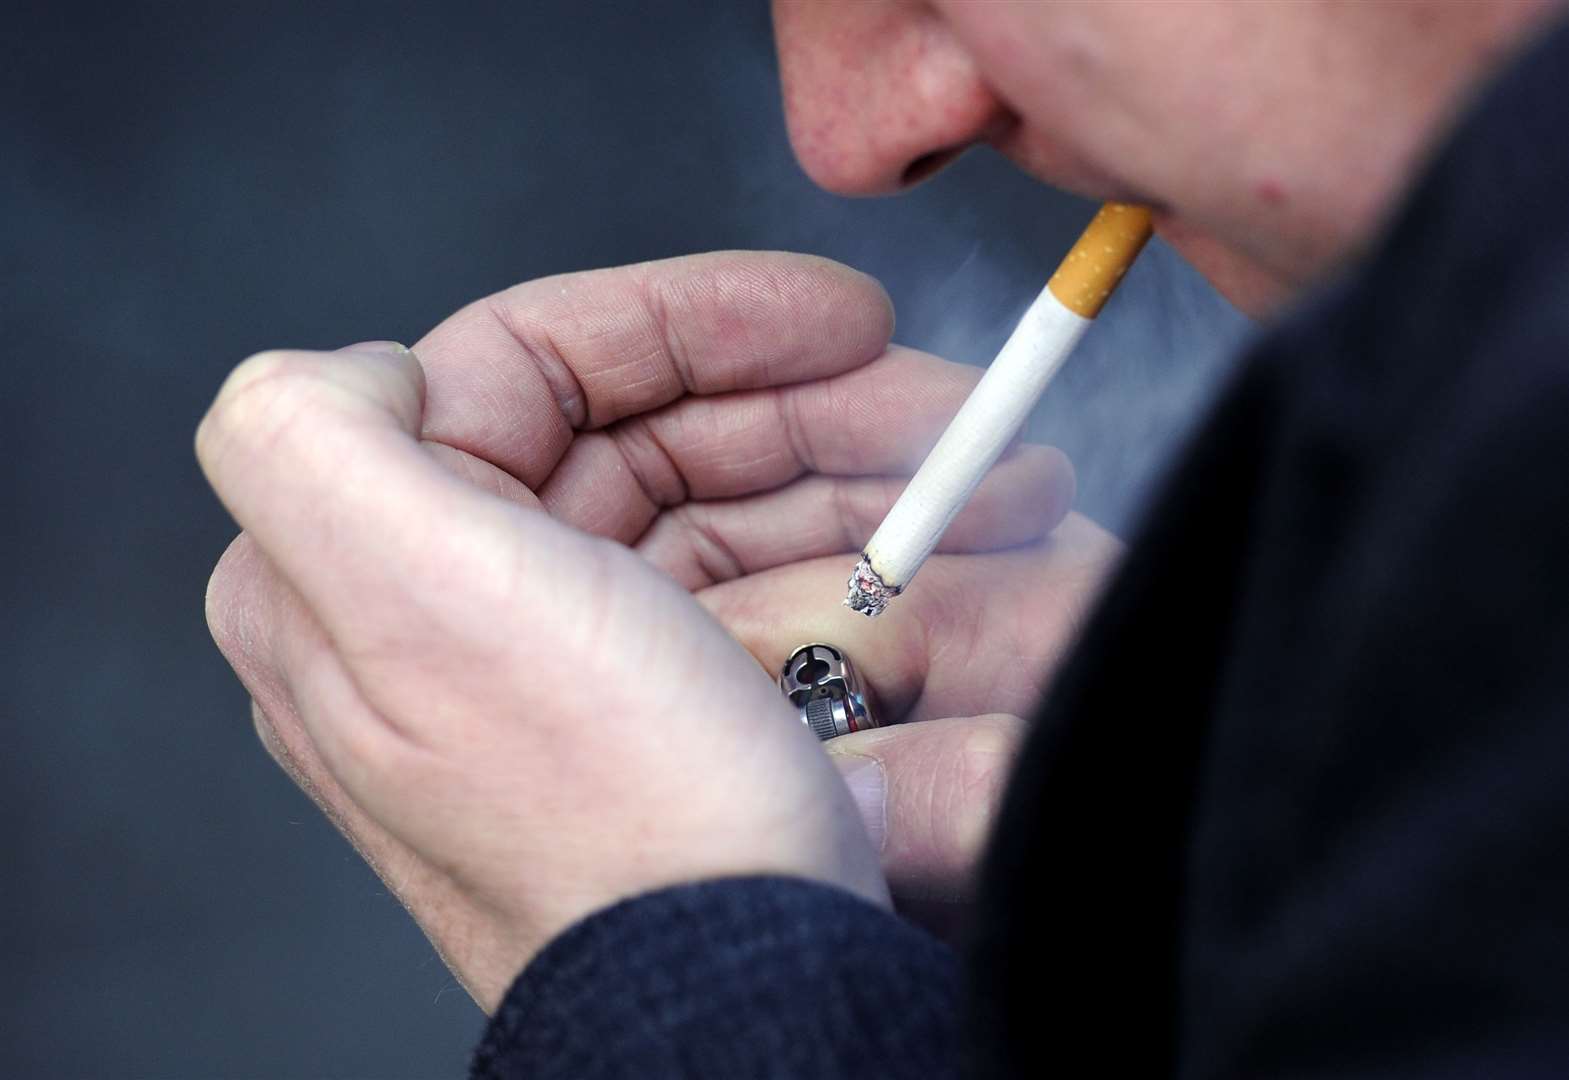 Ministers aim to reduce Ireland’s adult smoking rate to less than 5% (Jonathan Brady/PA)